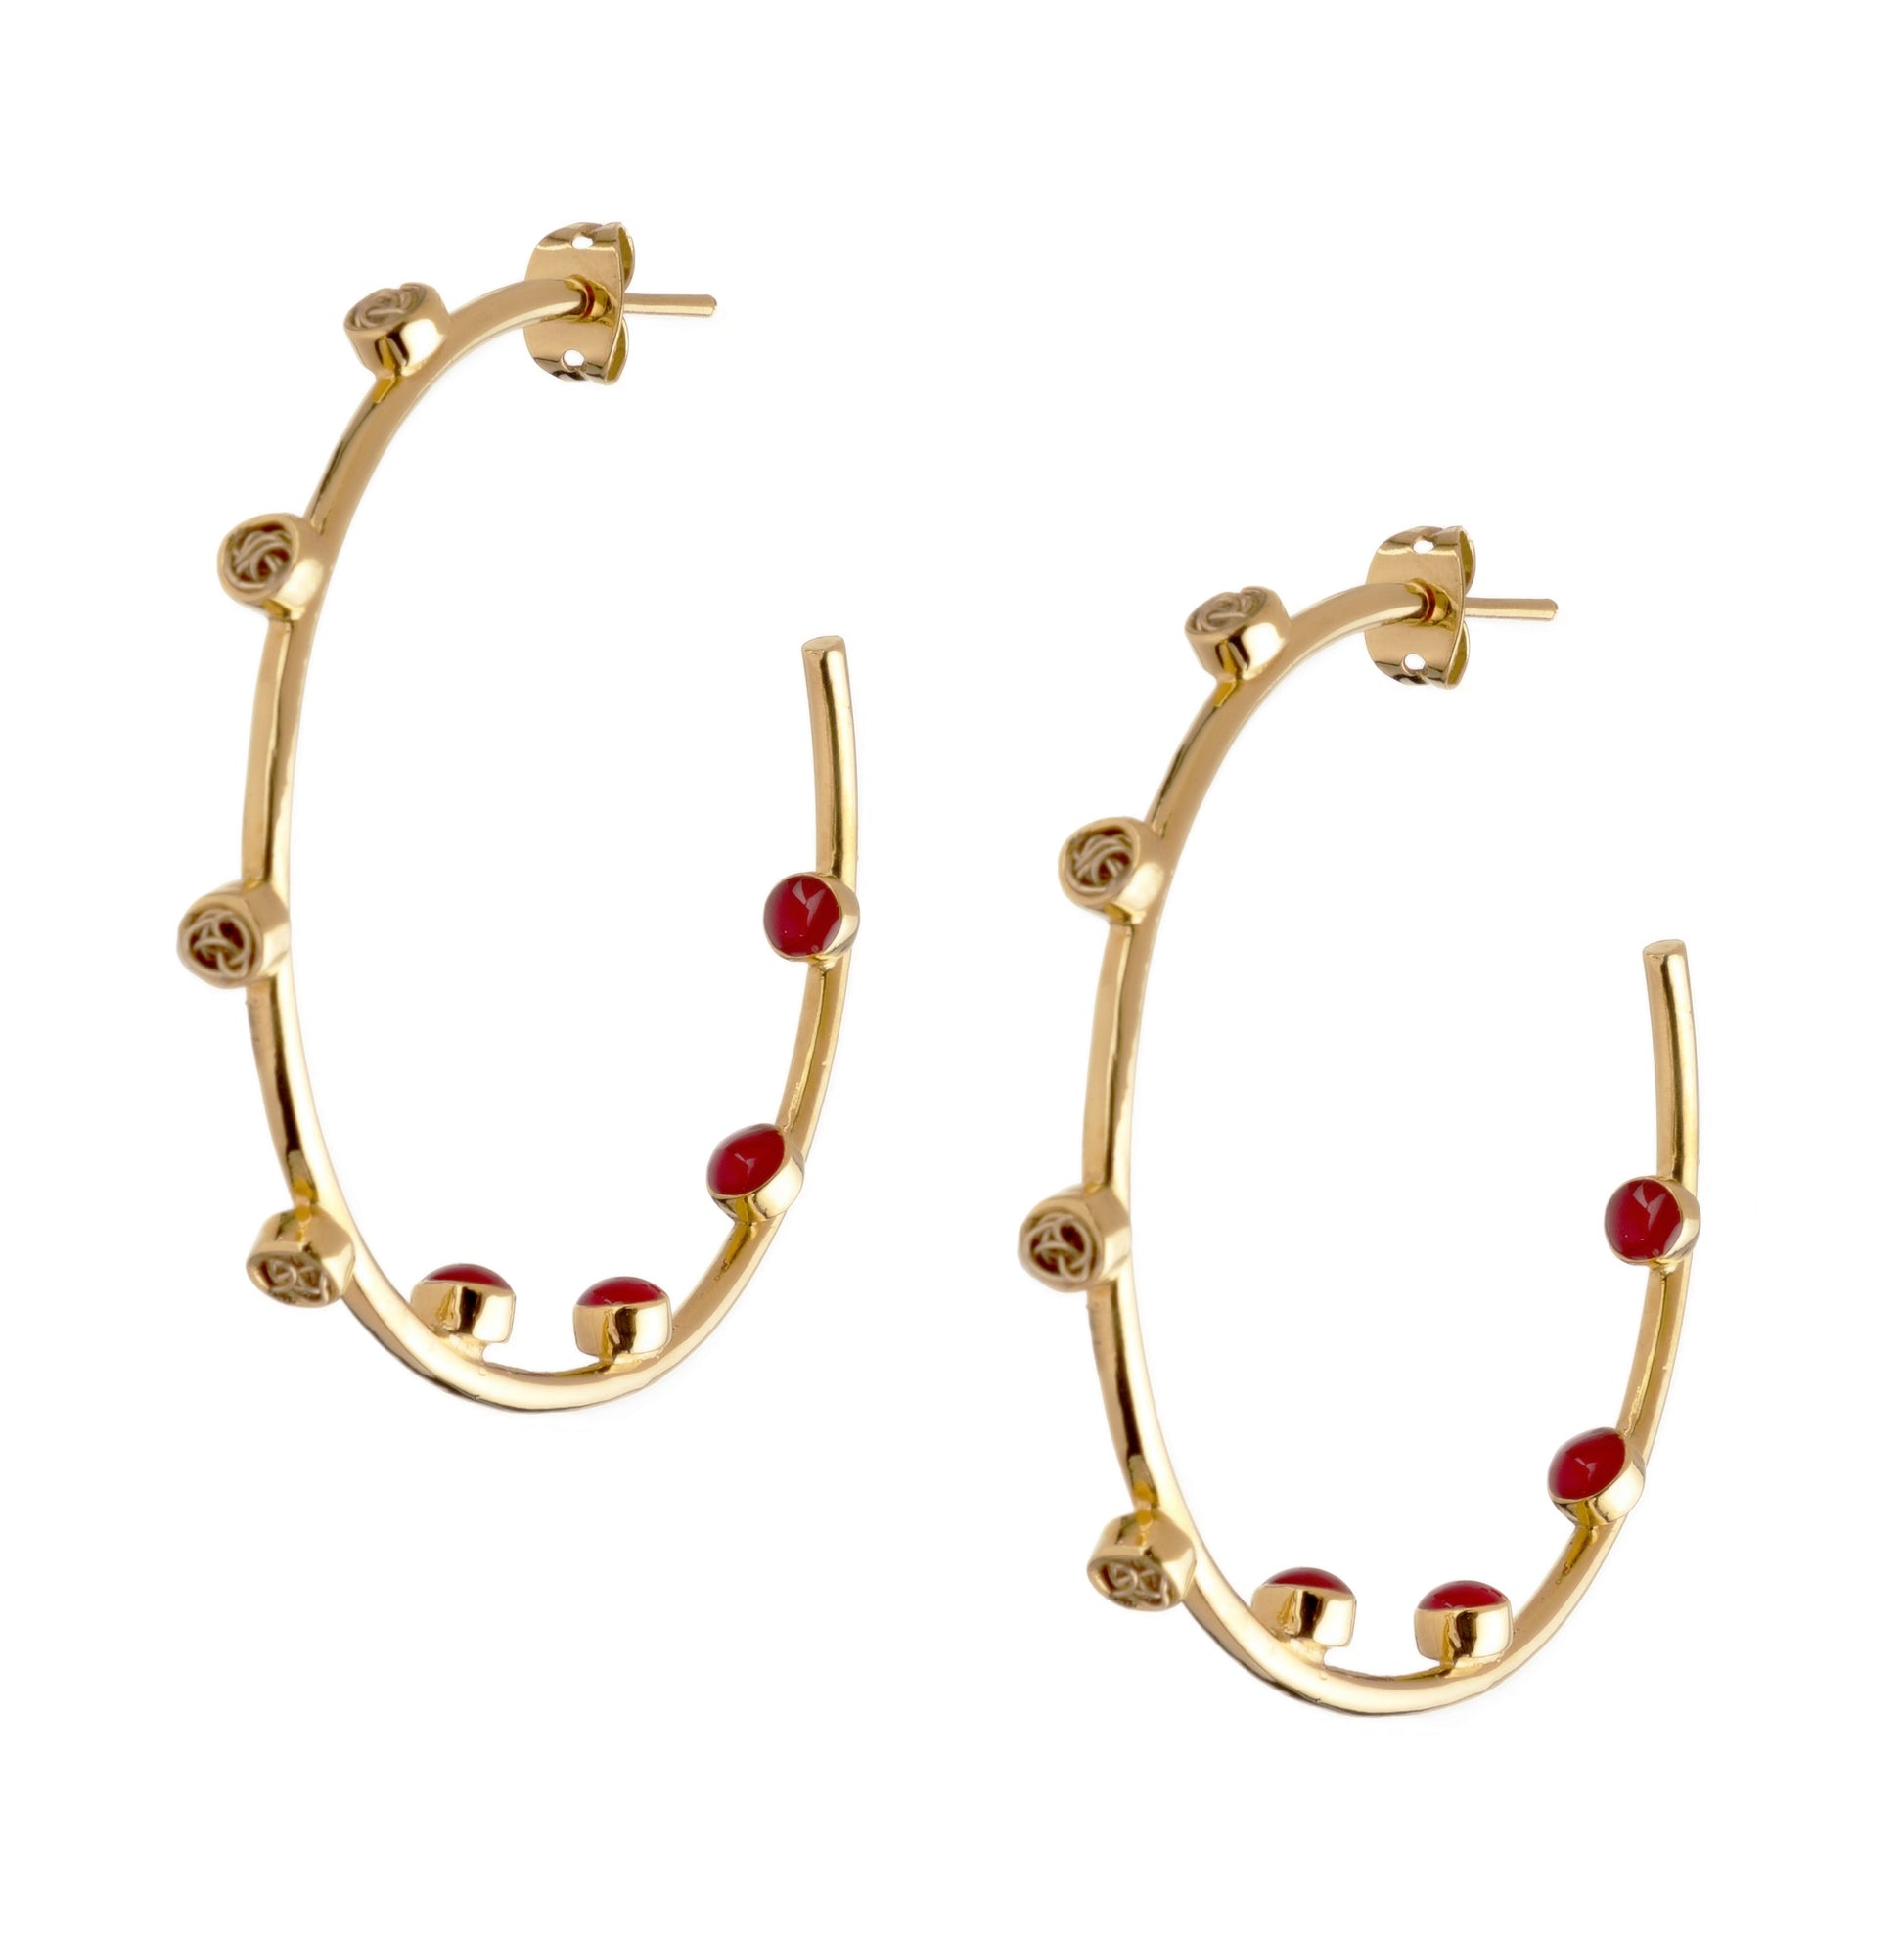 Stylish light gold hoop earrings with a blend of modern design elements and carefully enamel details